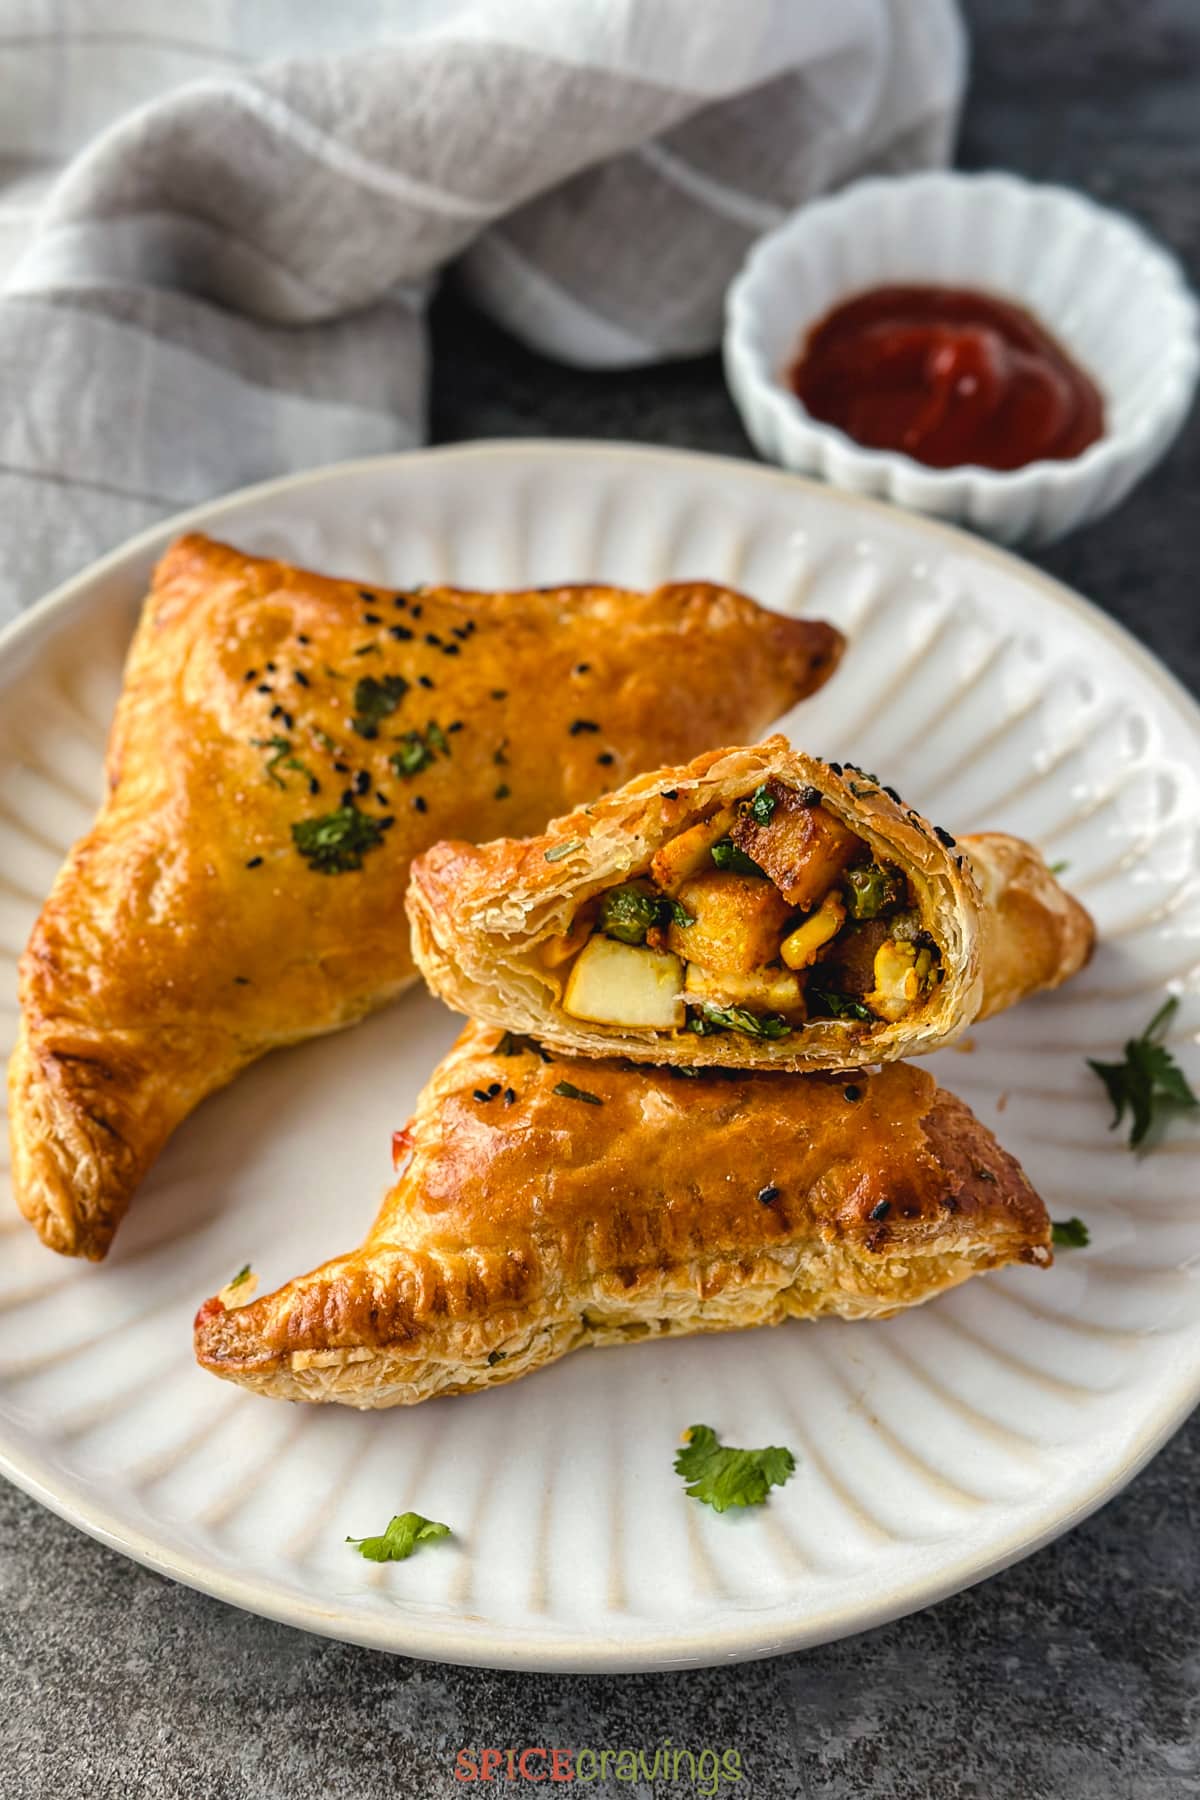 Vegetable Curry Puff stuffed with Indian spiced filling.